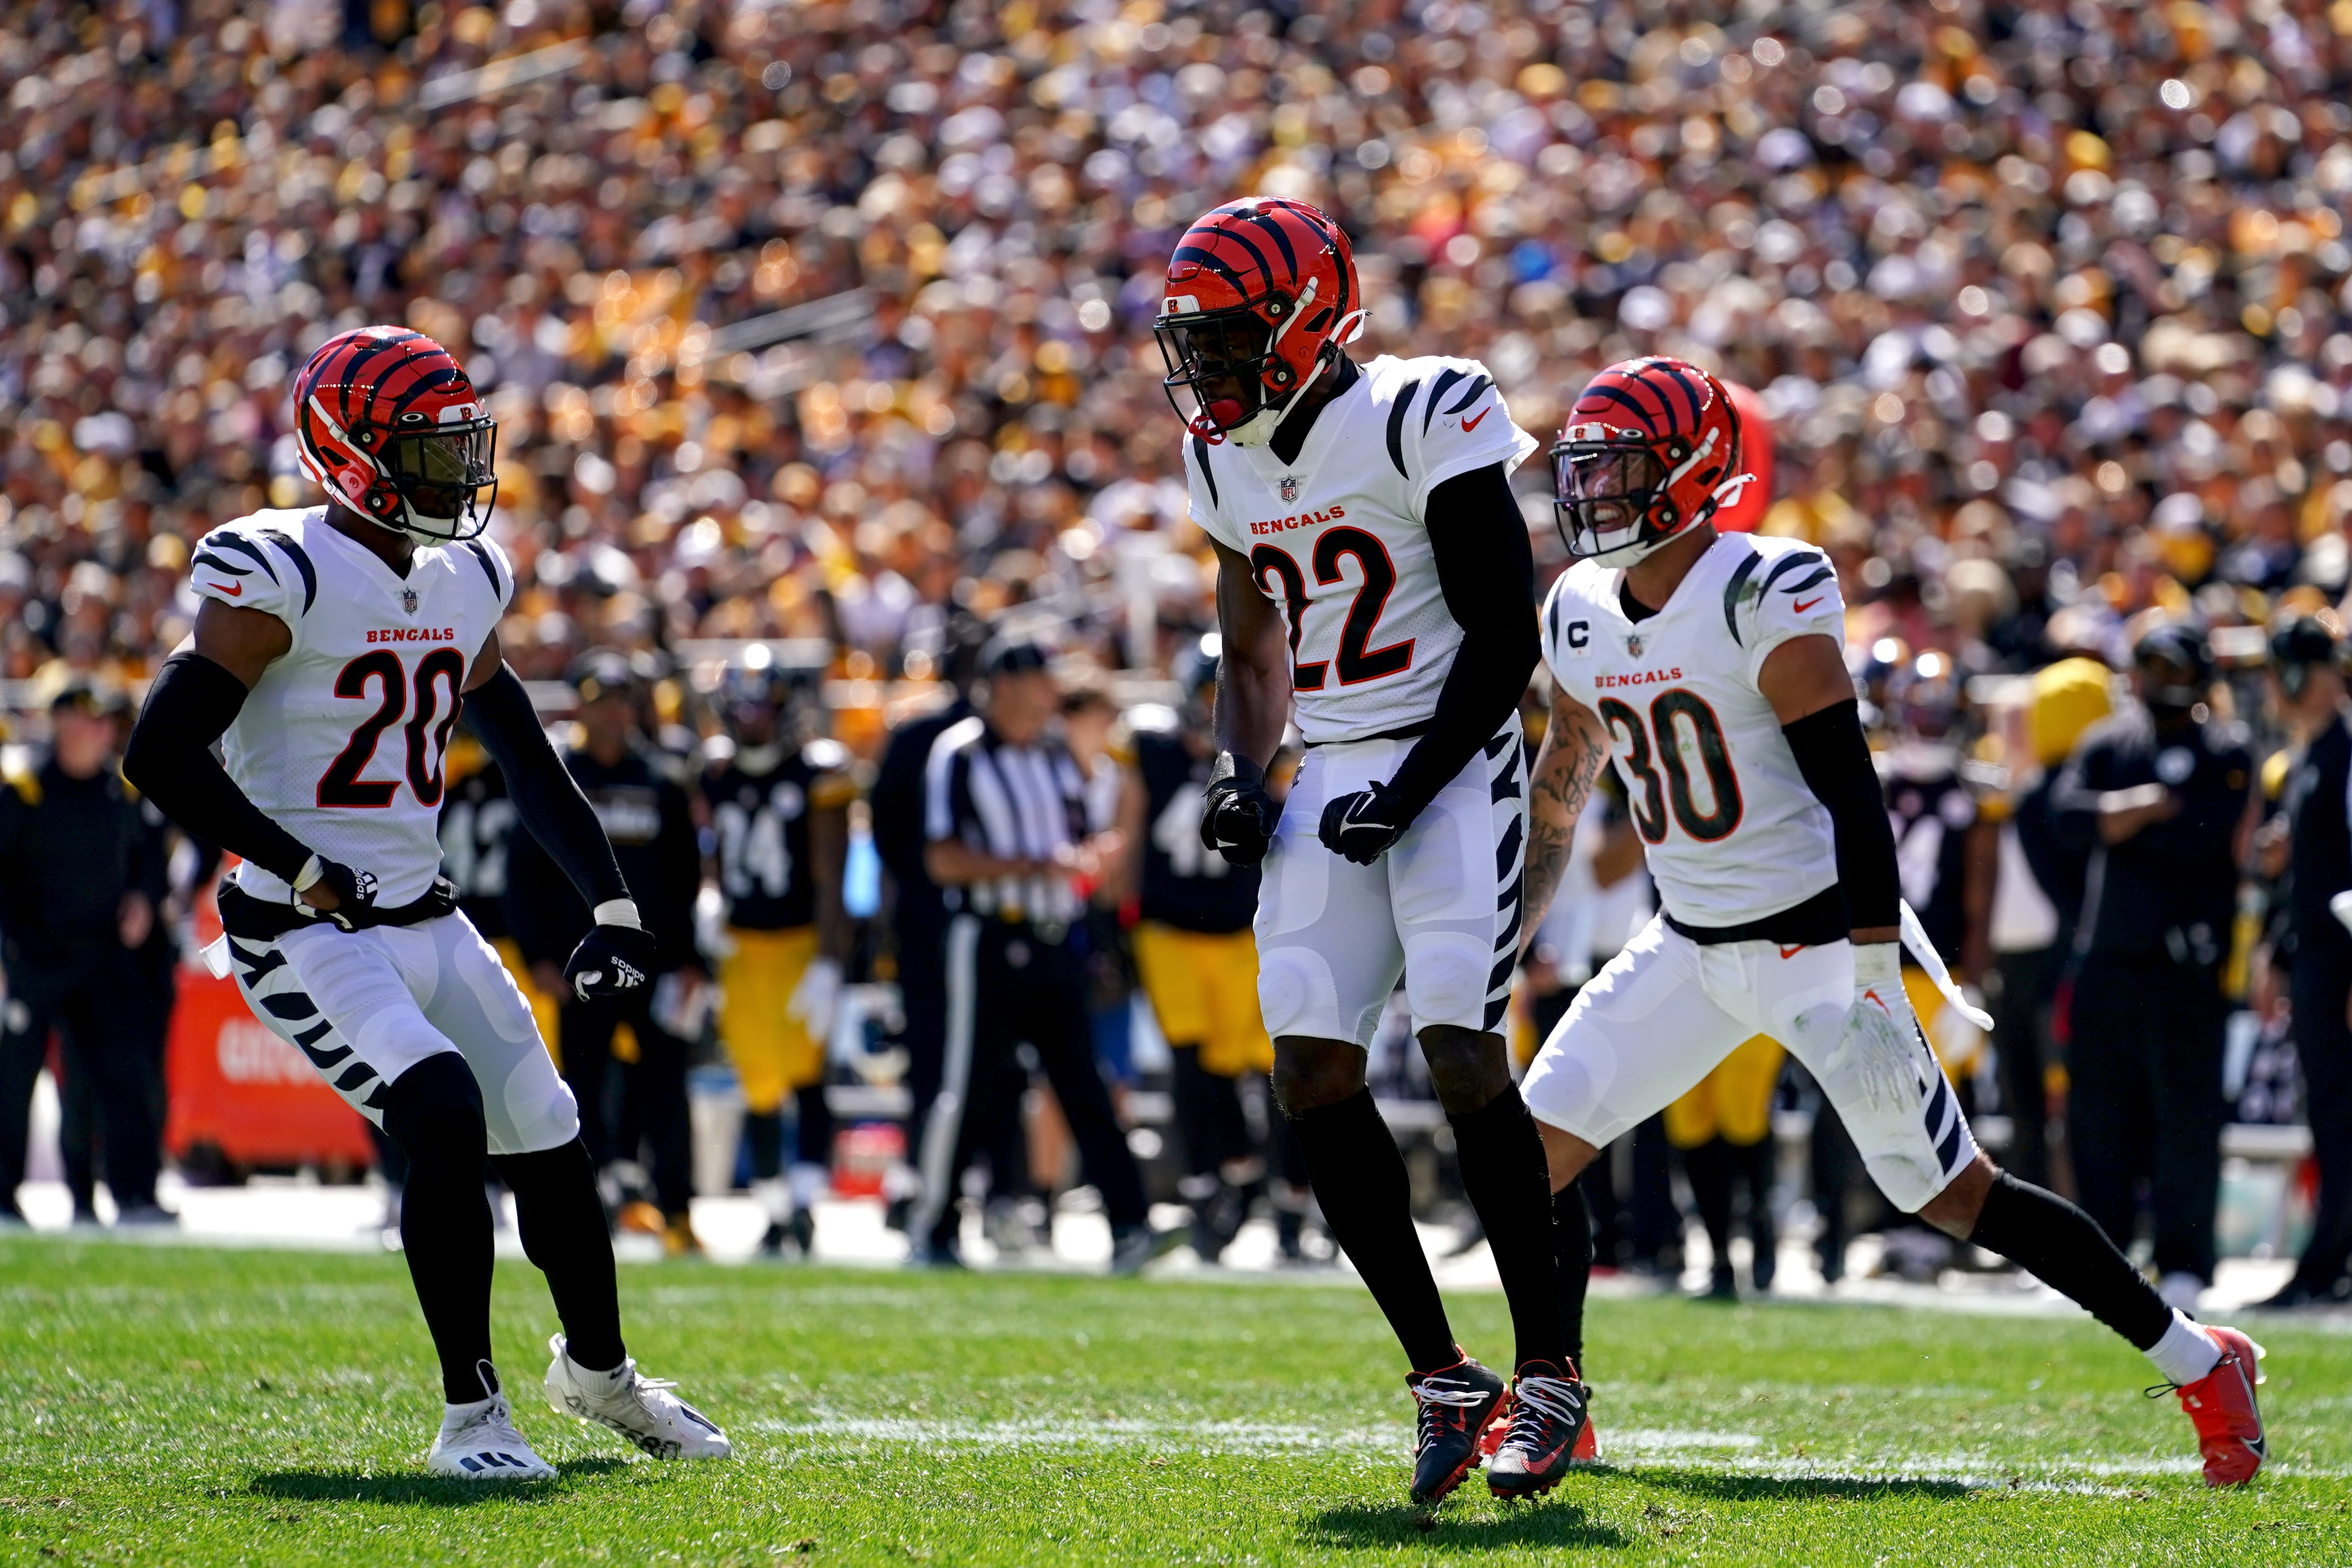 Cincinnati Bengals cornerback Chidobe Awuzie (22), center celebrates a tackle for loss of Pittsburgh Steelers wide receiver Chase Claypool (11) (not pictured) in the first quarter during a Week 3 NFL football game against the Pittsburgh Steelers, Sunday, Sept. 26, 2021, at Heinz Field in Pittsburgh.